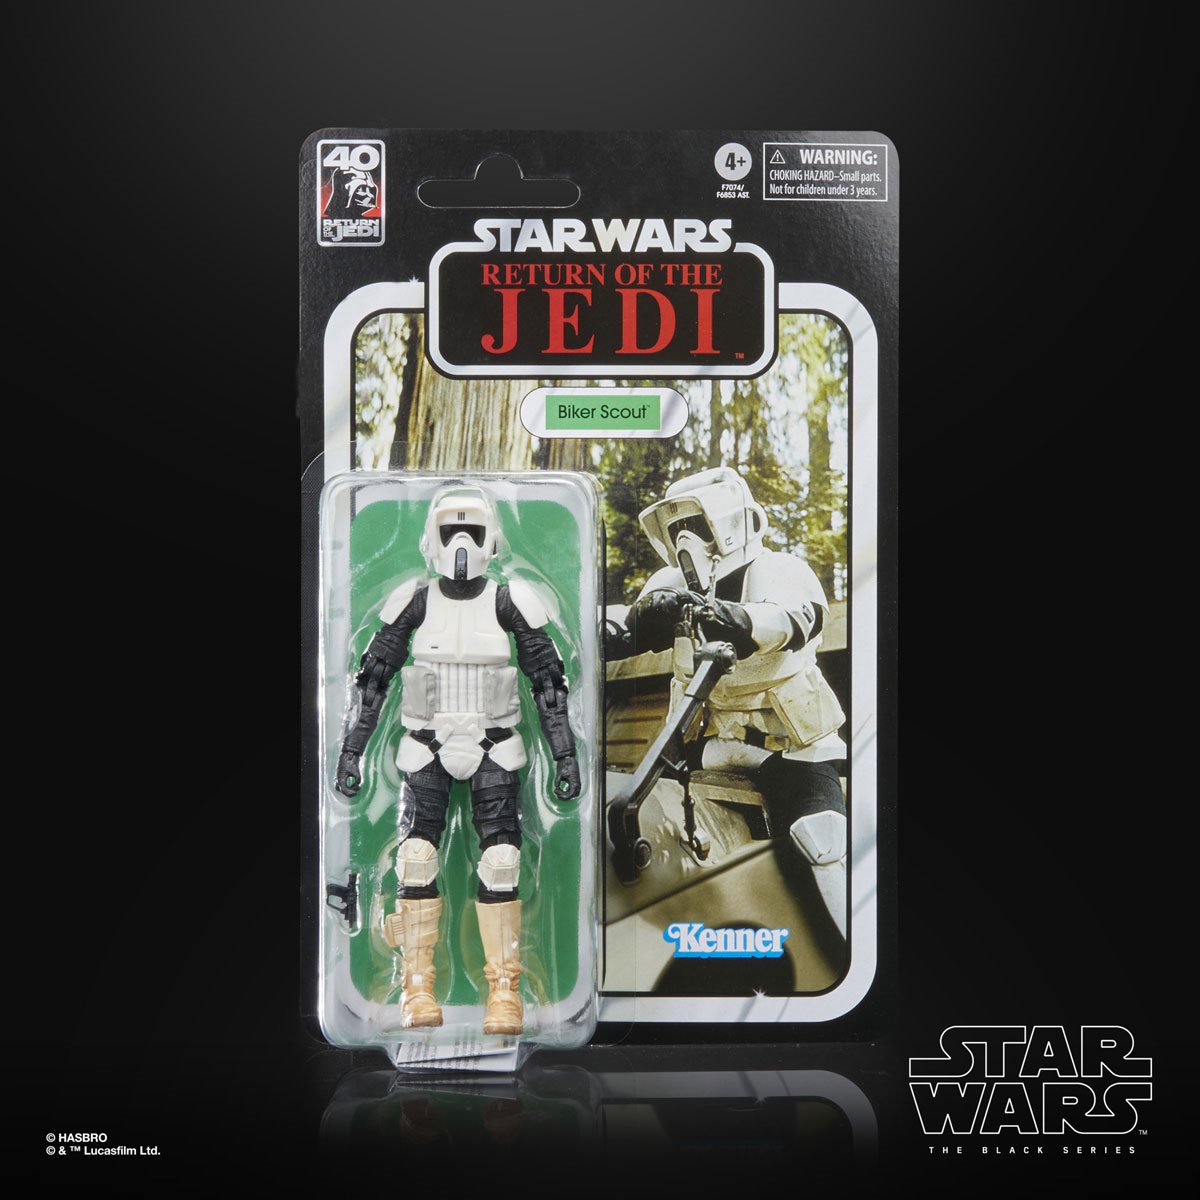 Star Wars The Black Series Return of the Jedi 40th Anniversary 6-Inch Biker  Scout Action Figure